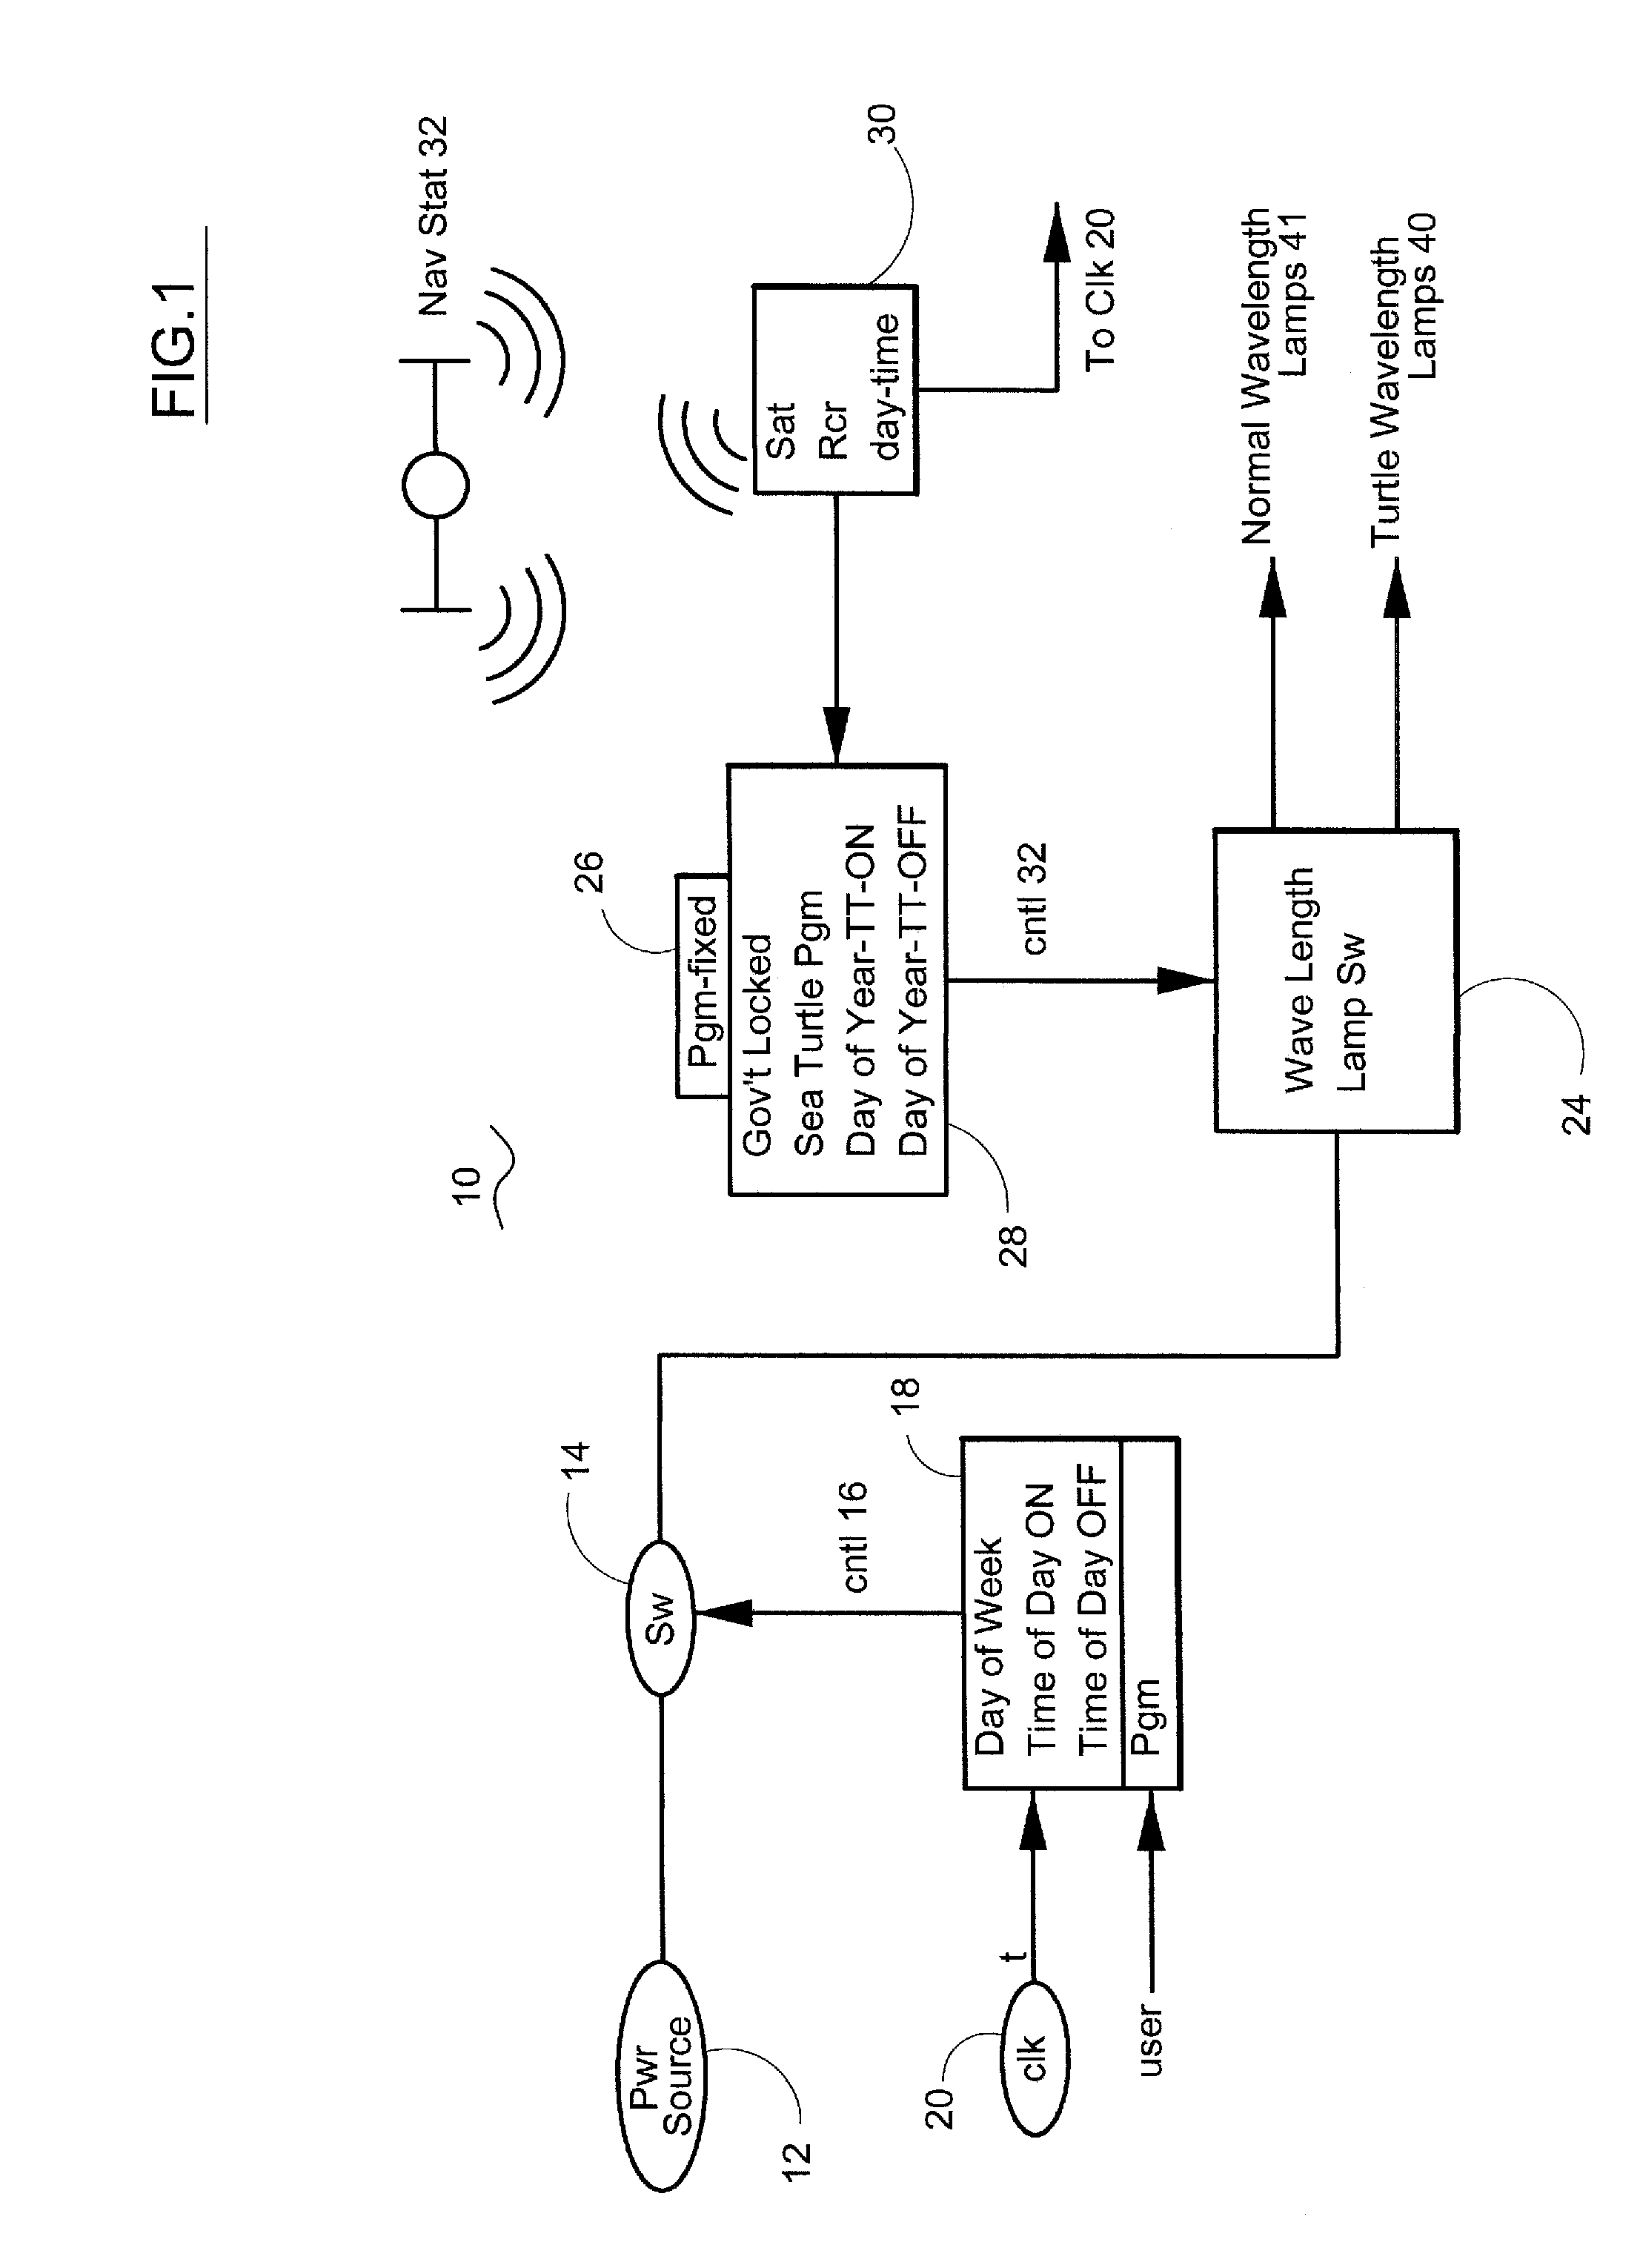 Sea turtle light control system and method